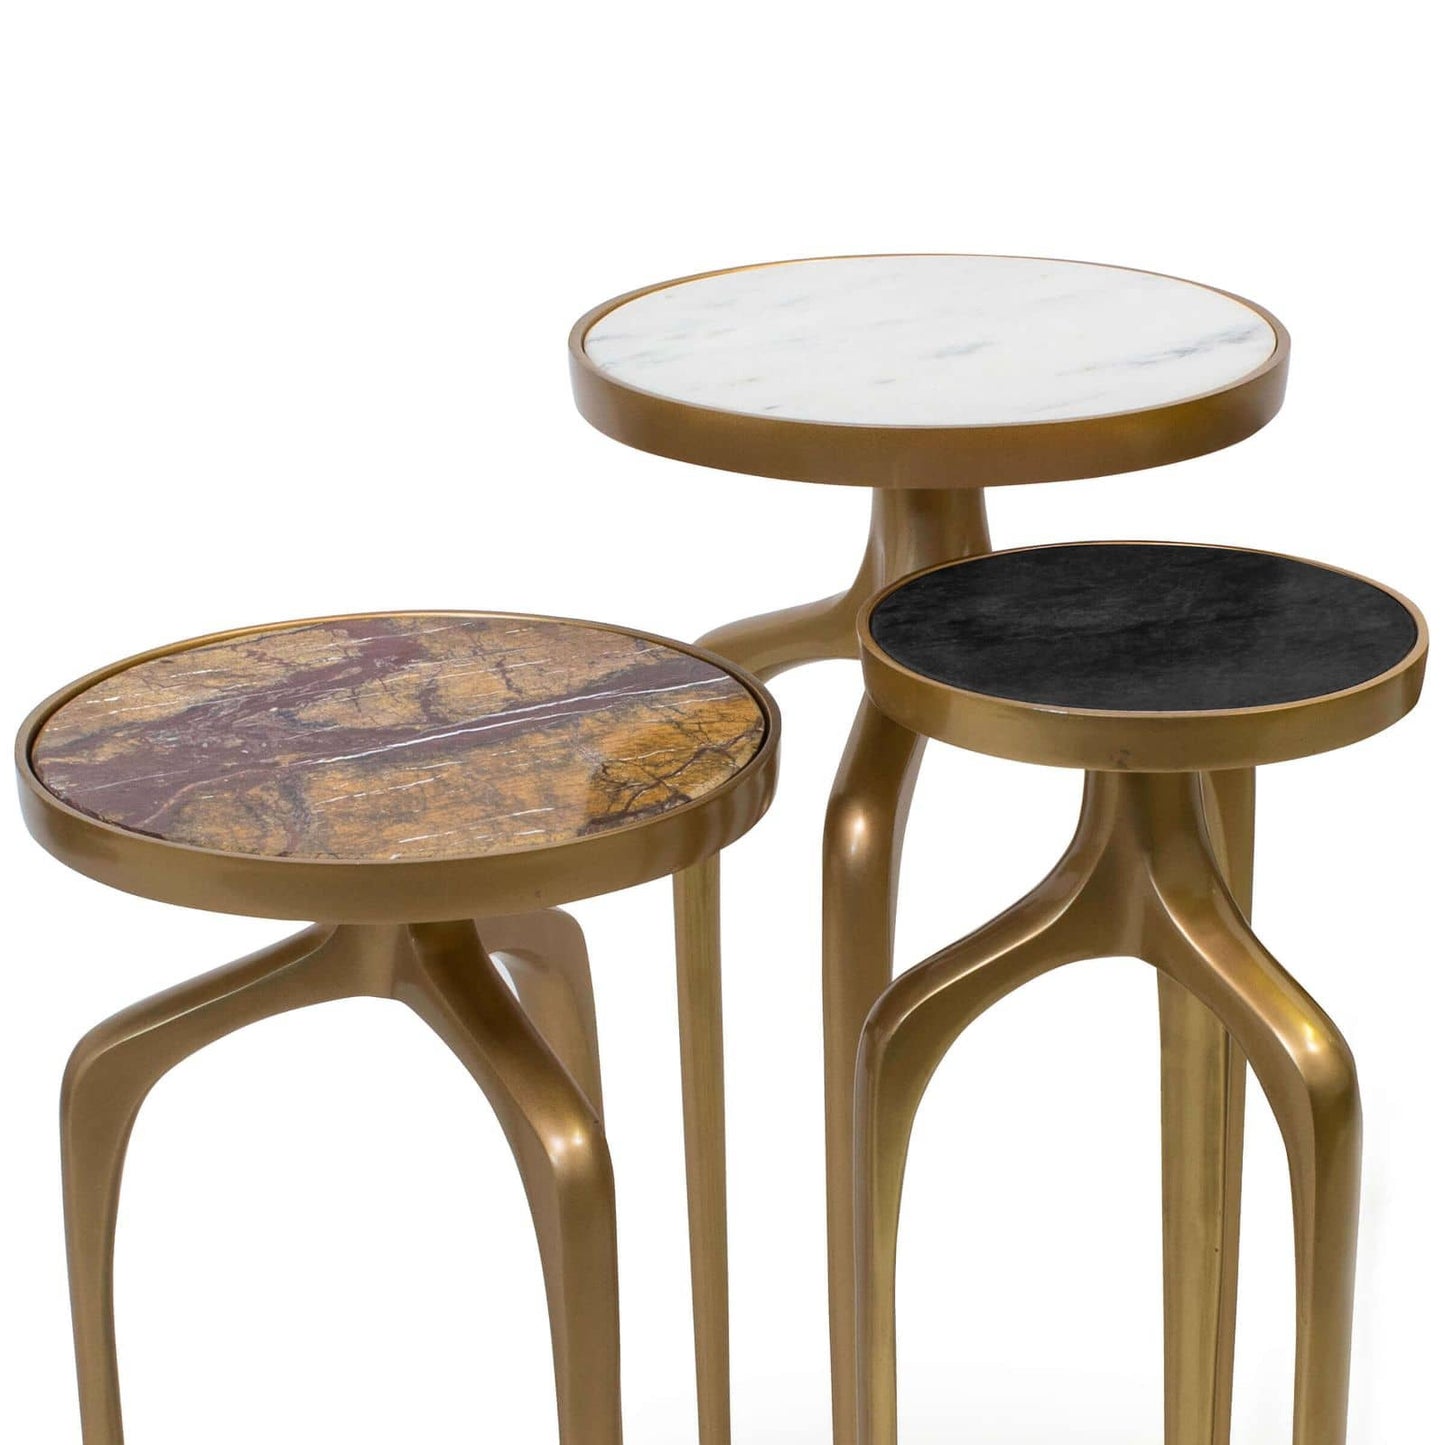 Mixer Brass & Stone Tables